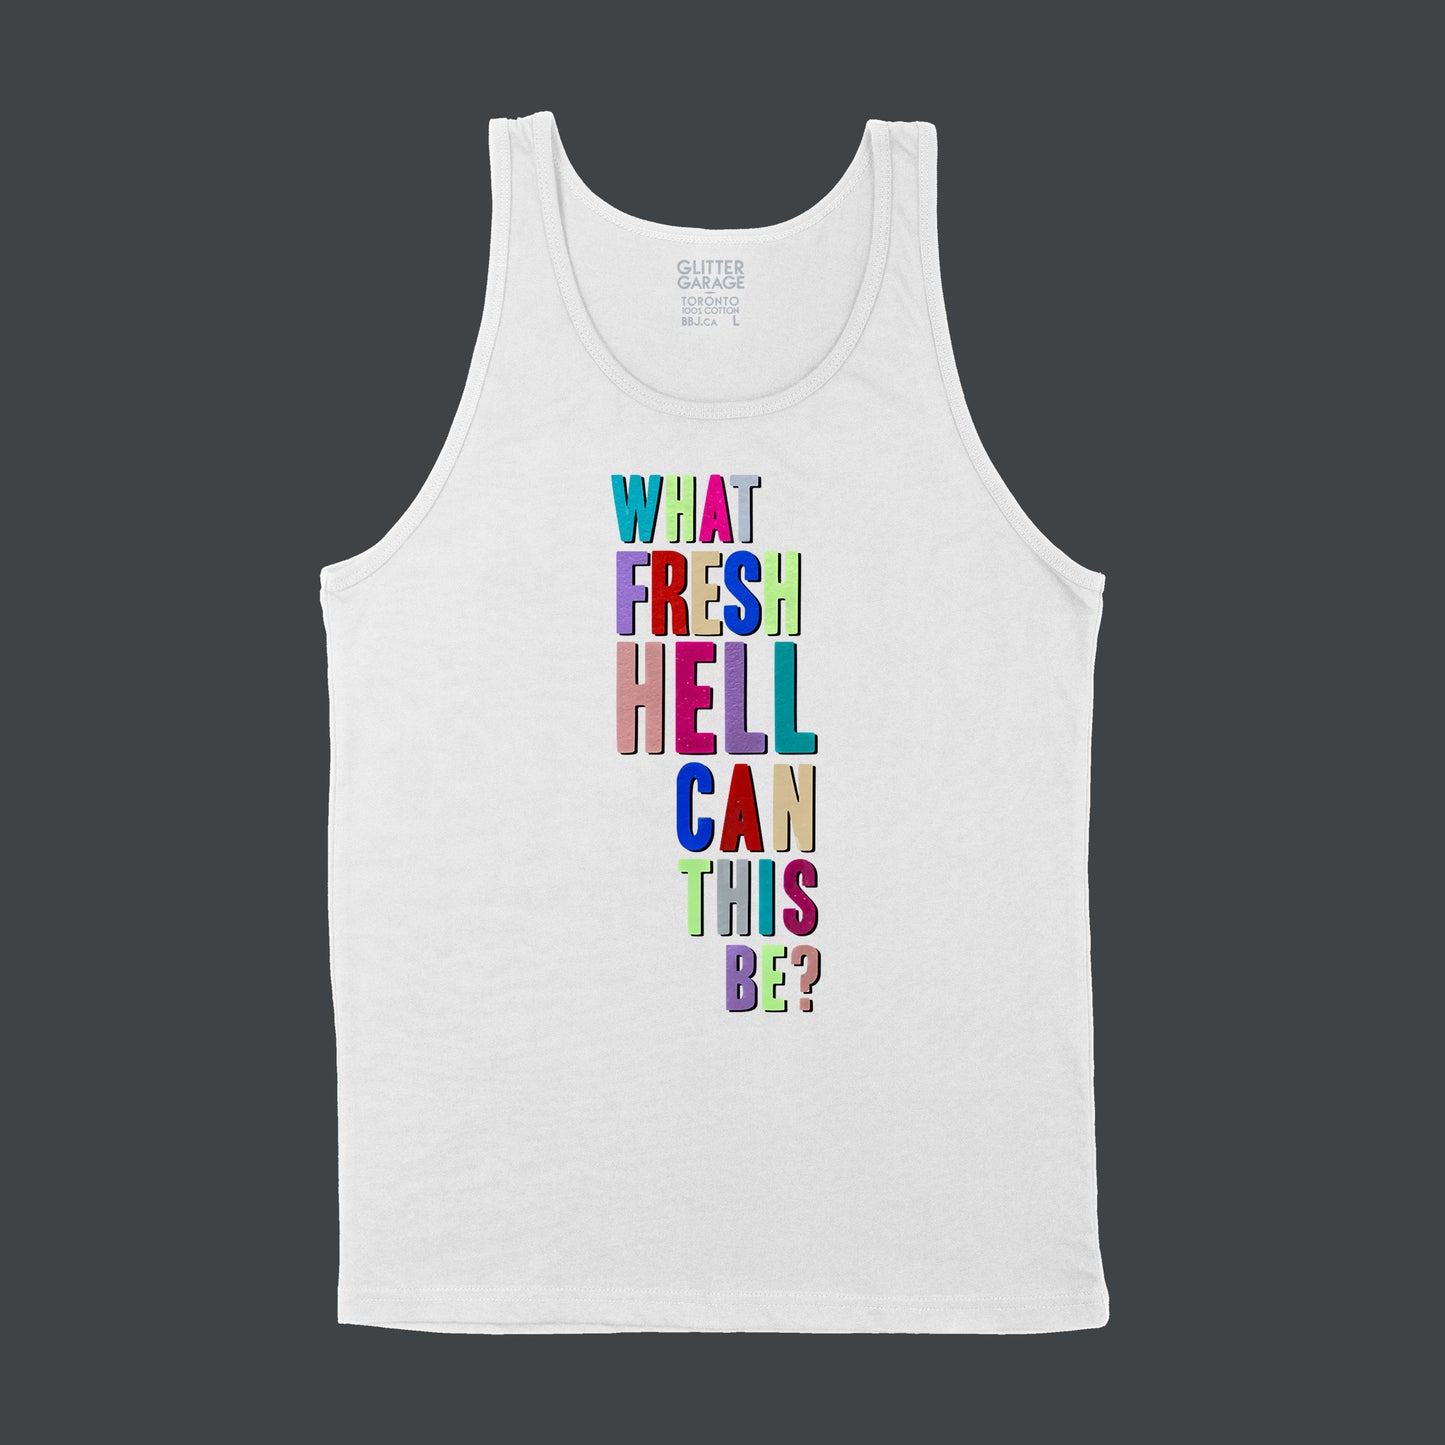 White unisex tank shirt with multicolour metallic text "what fresh hell can this be?" by BBJ / Glitter Garage